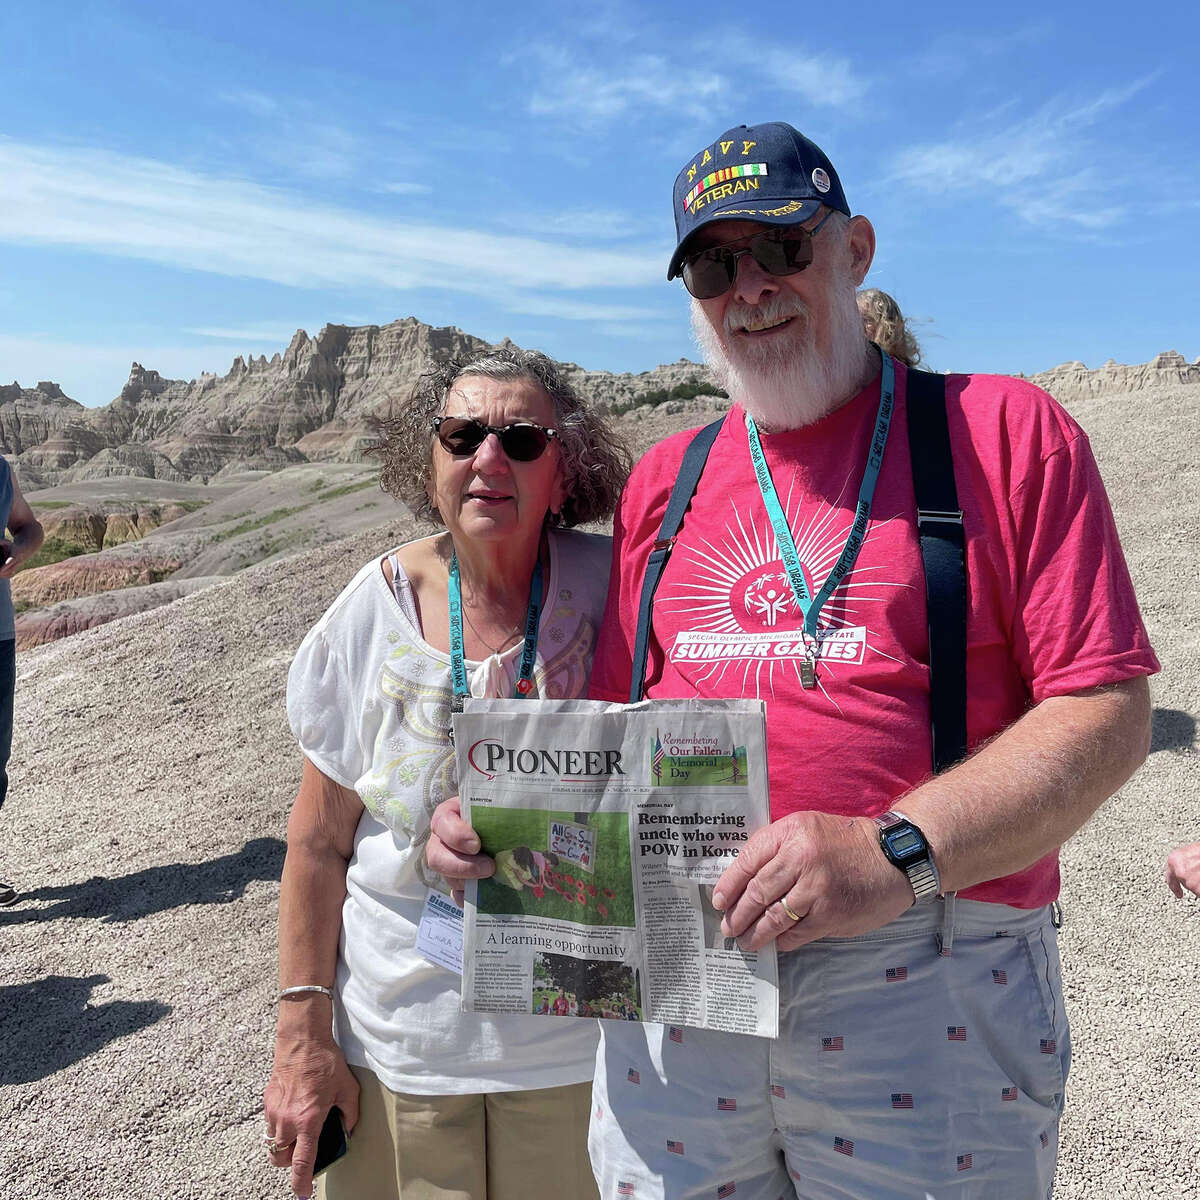 Harry and Laura Johnson, of Bitely, recently took the Pioneer with them on a trip out West. They said visiting Mt. Rushmore was on their bucket list.